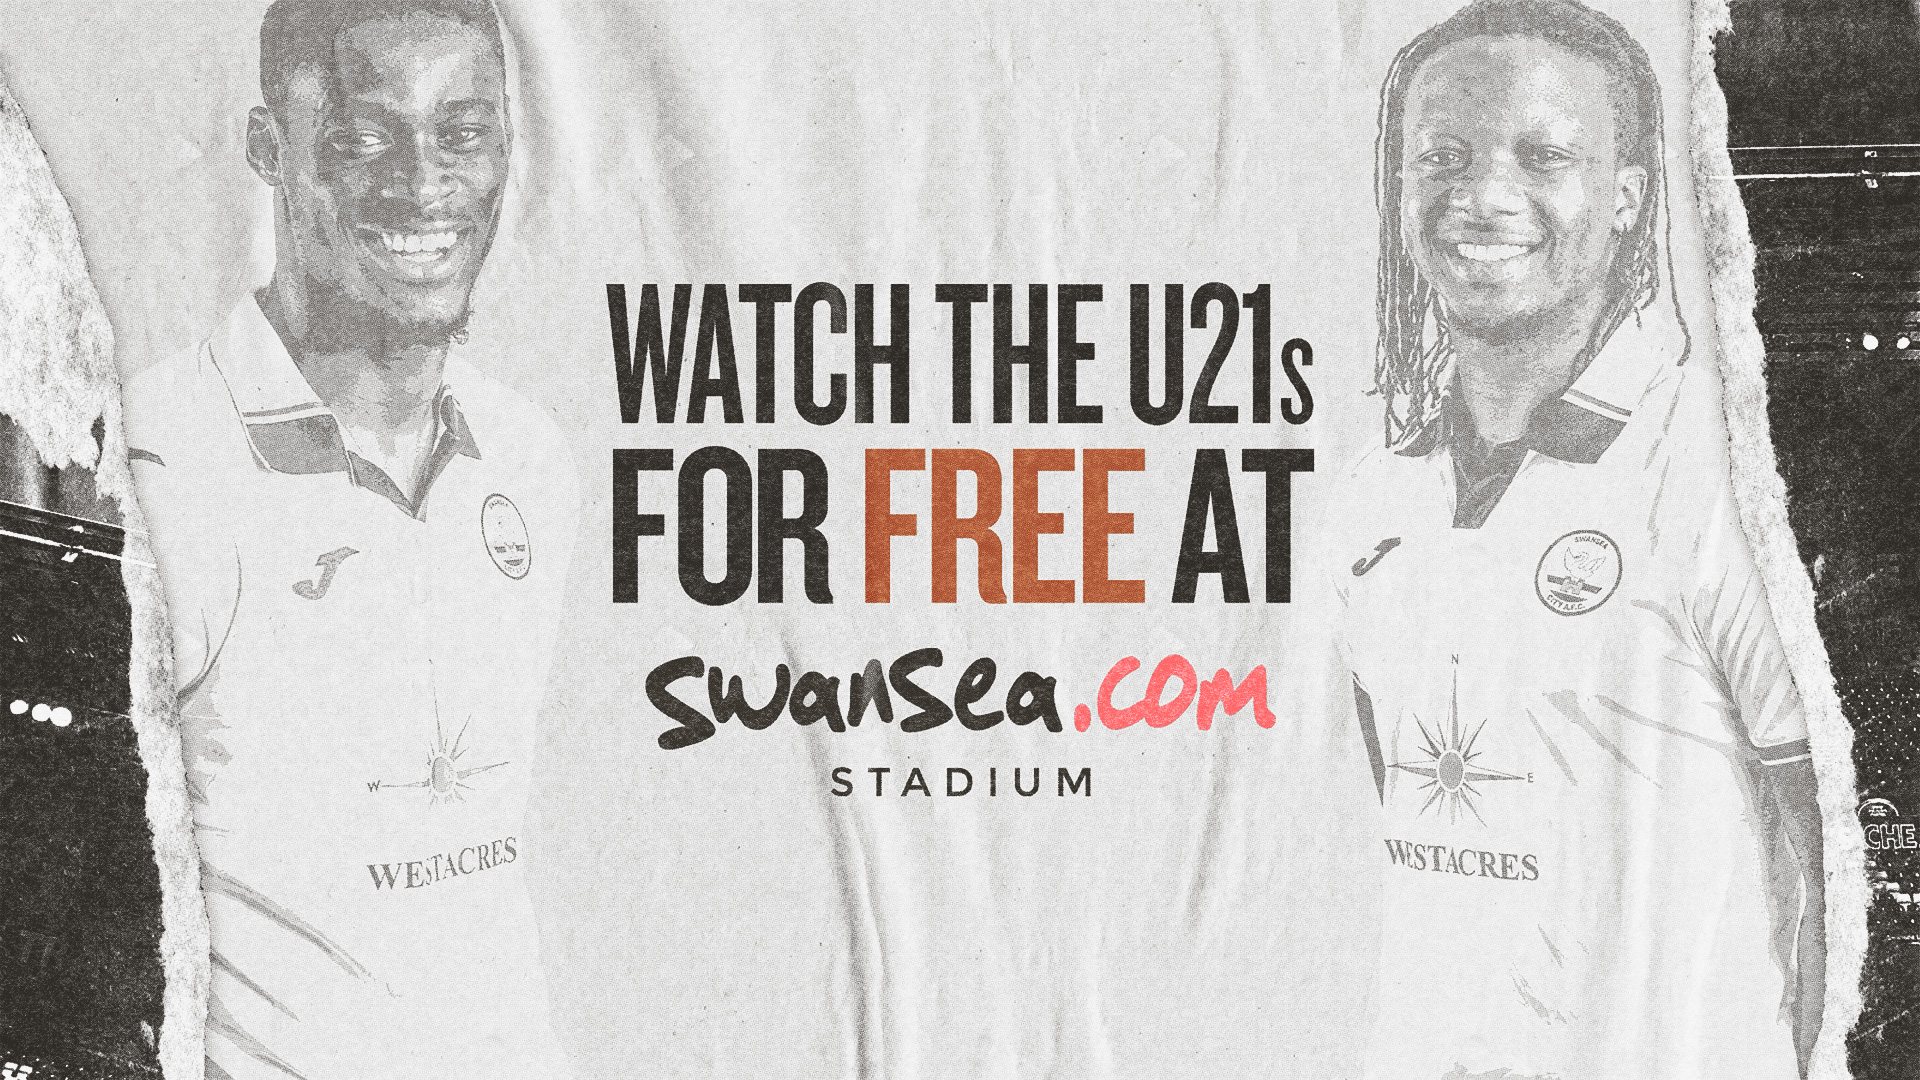 Watch the U21s for free at the Swansea.com Stadium